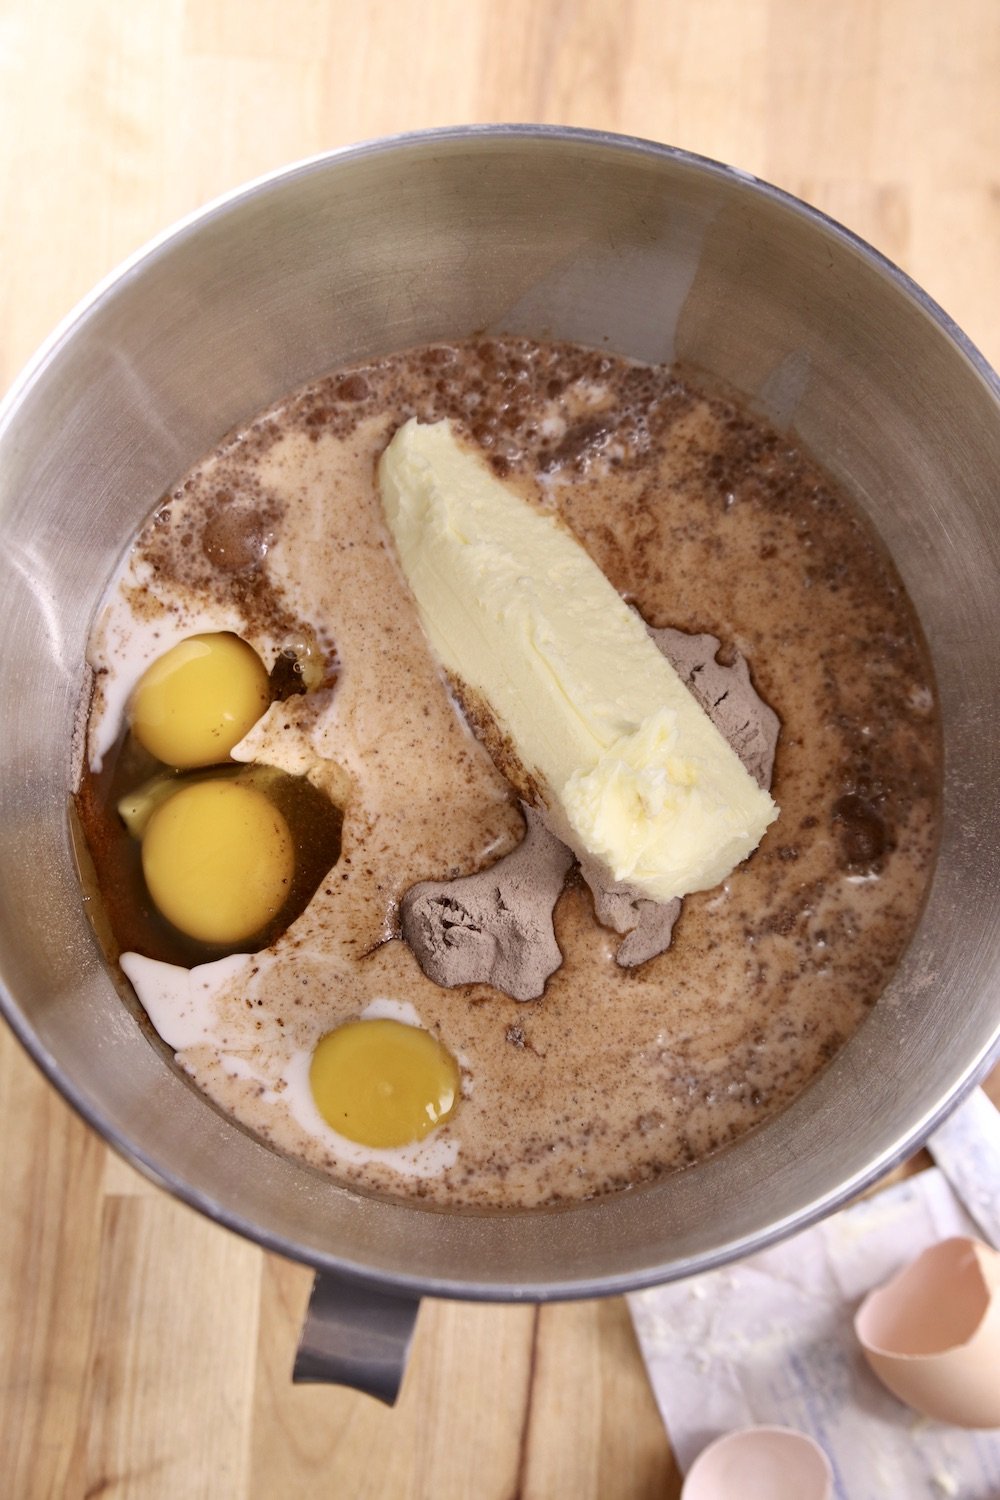 metal mixer bowl with cake mix, eggs, milk, butter and instant pudding mix